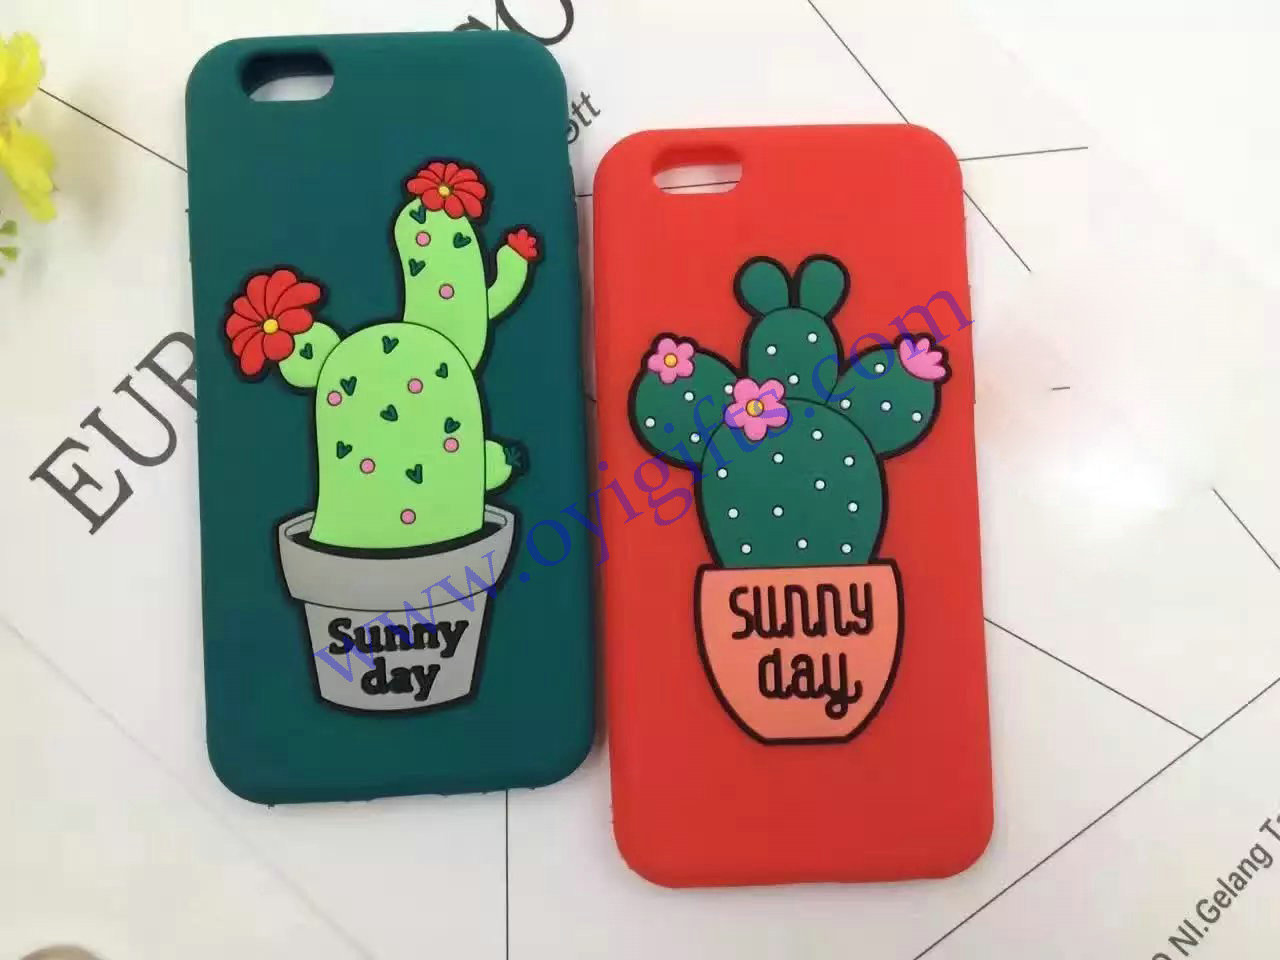 Cute Cacti Silicon phone covers case soft skin supplier